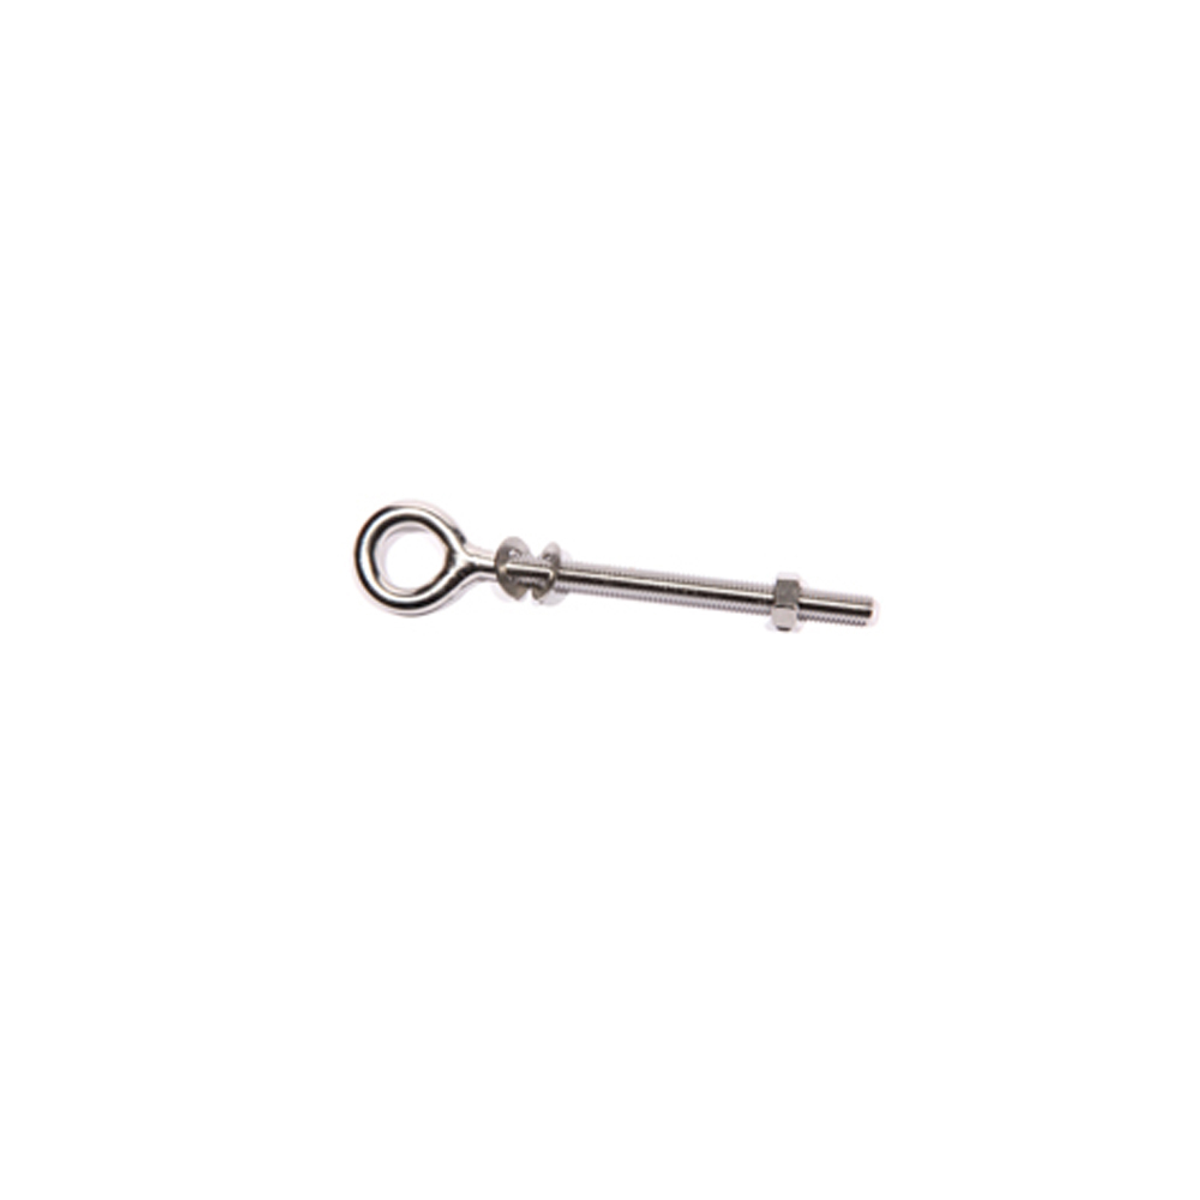 Eye bolt with nut for wooden pole M8x100mm single